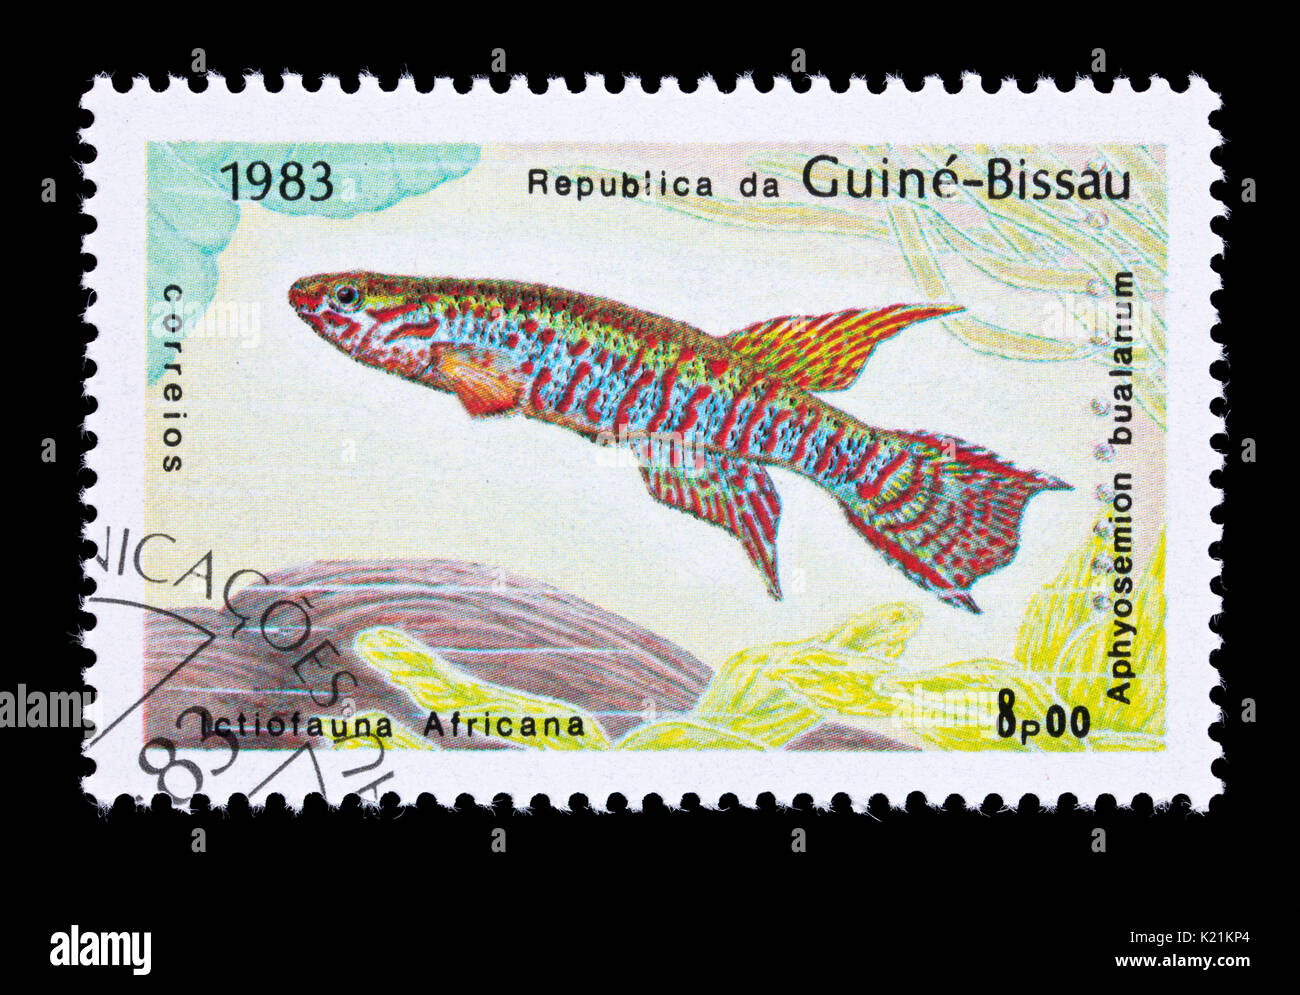 Postage stamp from Guinea-Bissau depicting a Aphyosemion bualanum Stock Photo